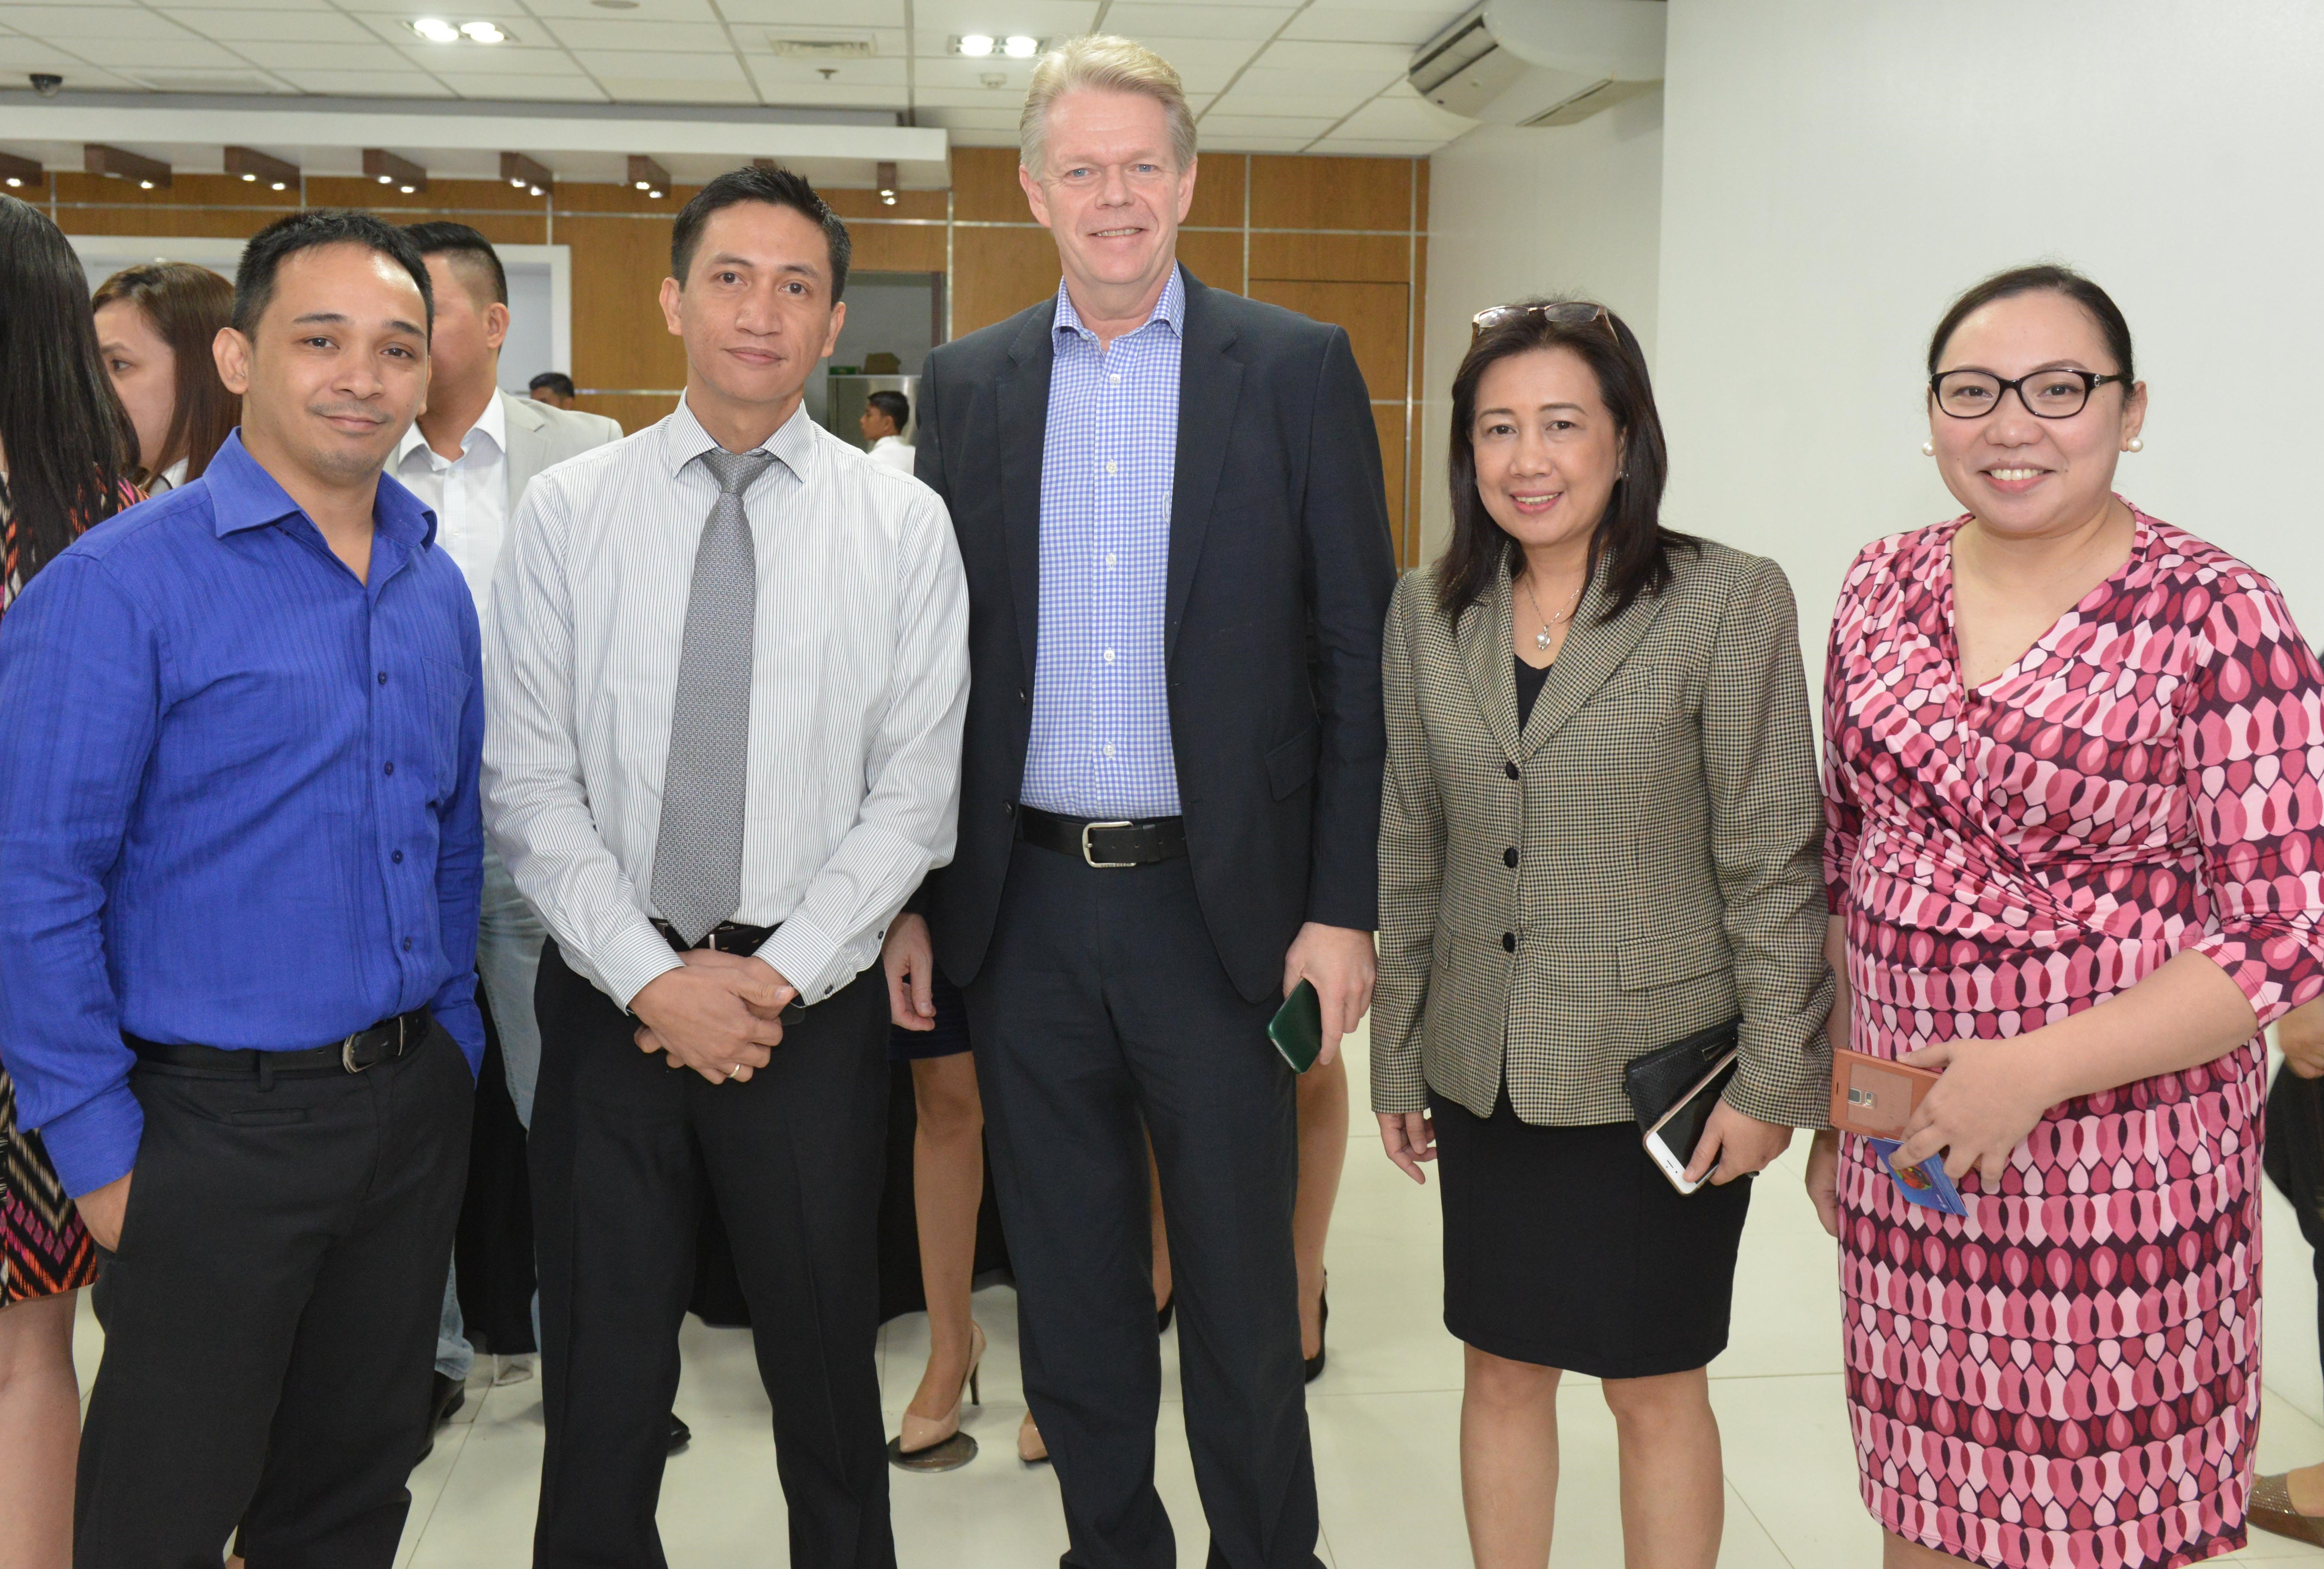 Globe Senior Advisor for Enterprise and IT-Enabled Services Group Mike Frausing (center) is joined by officials from Globe Business and representatives from its enterprise clientele from the healthcare sector.